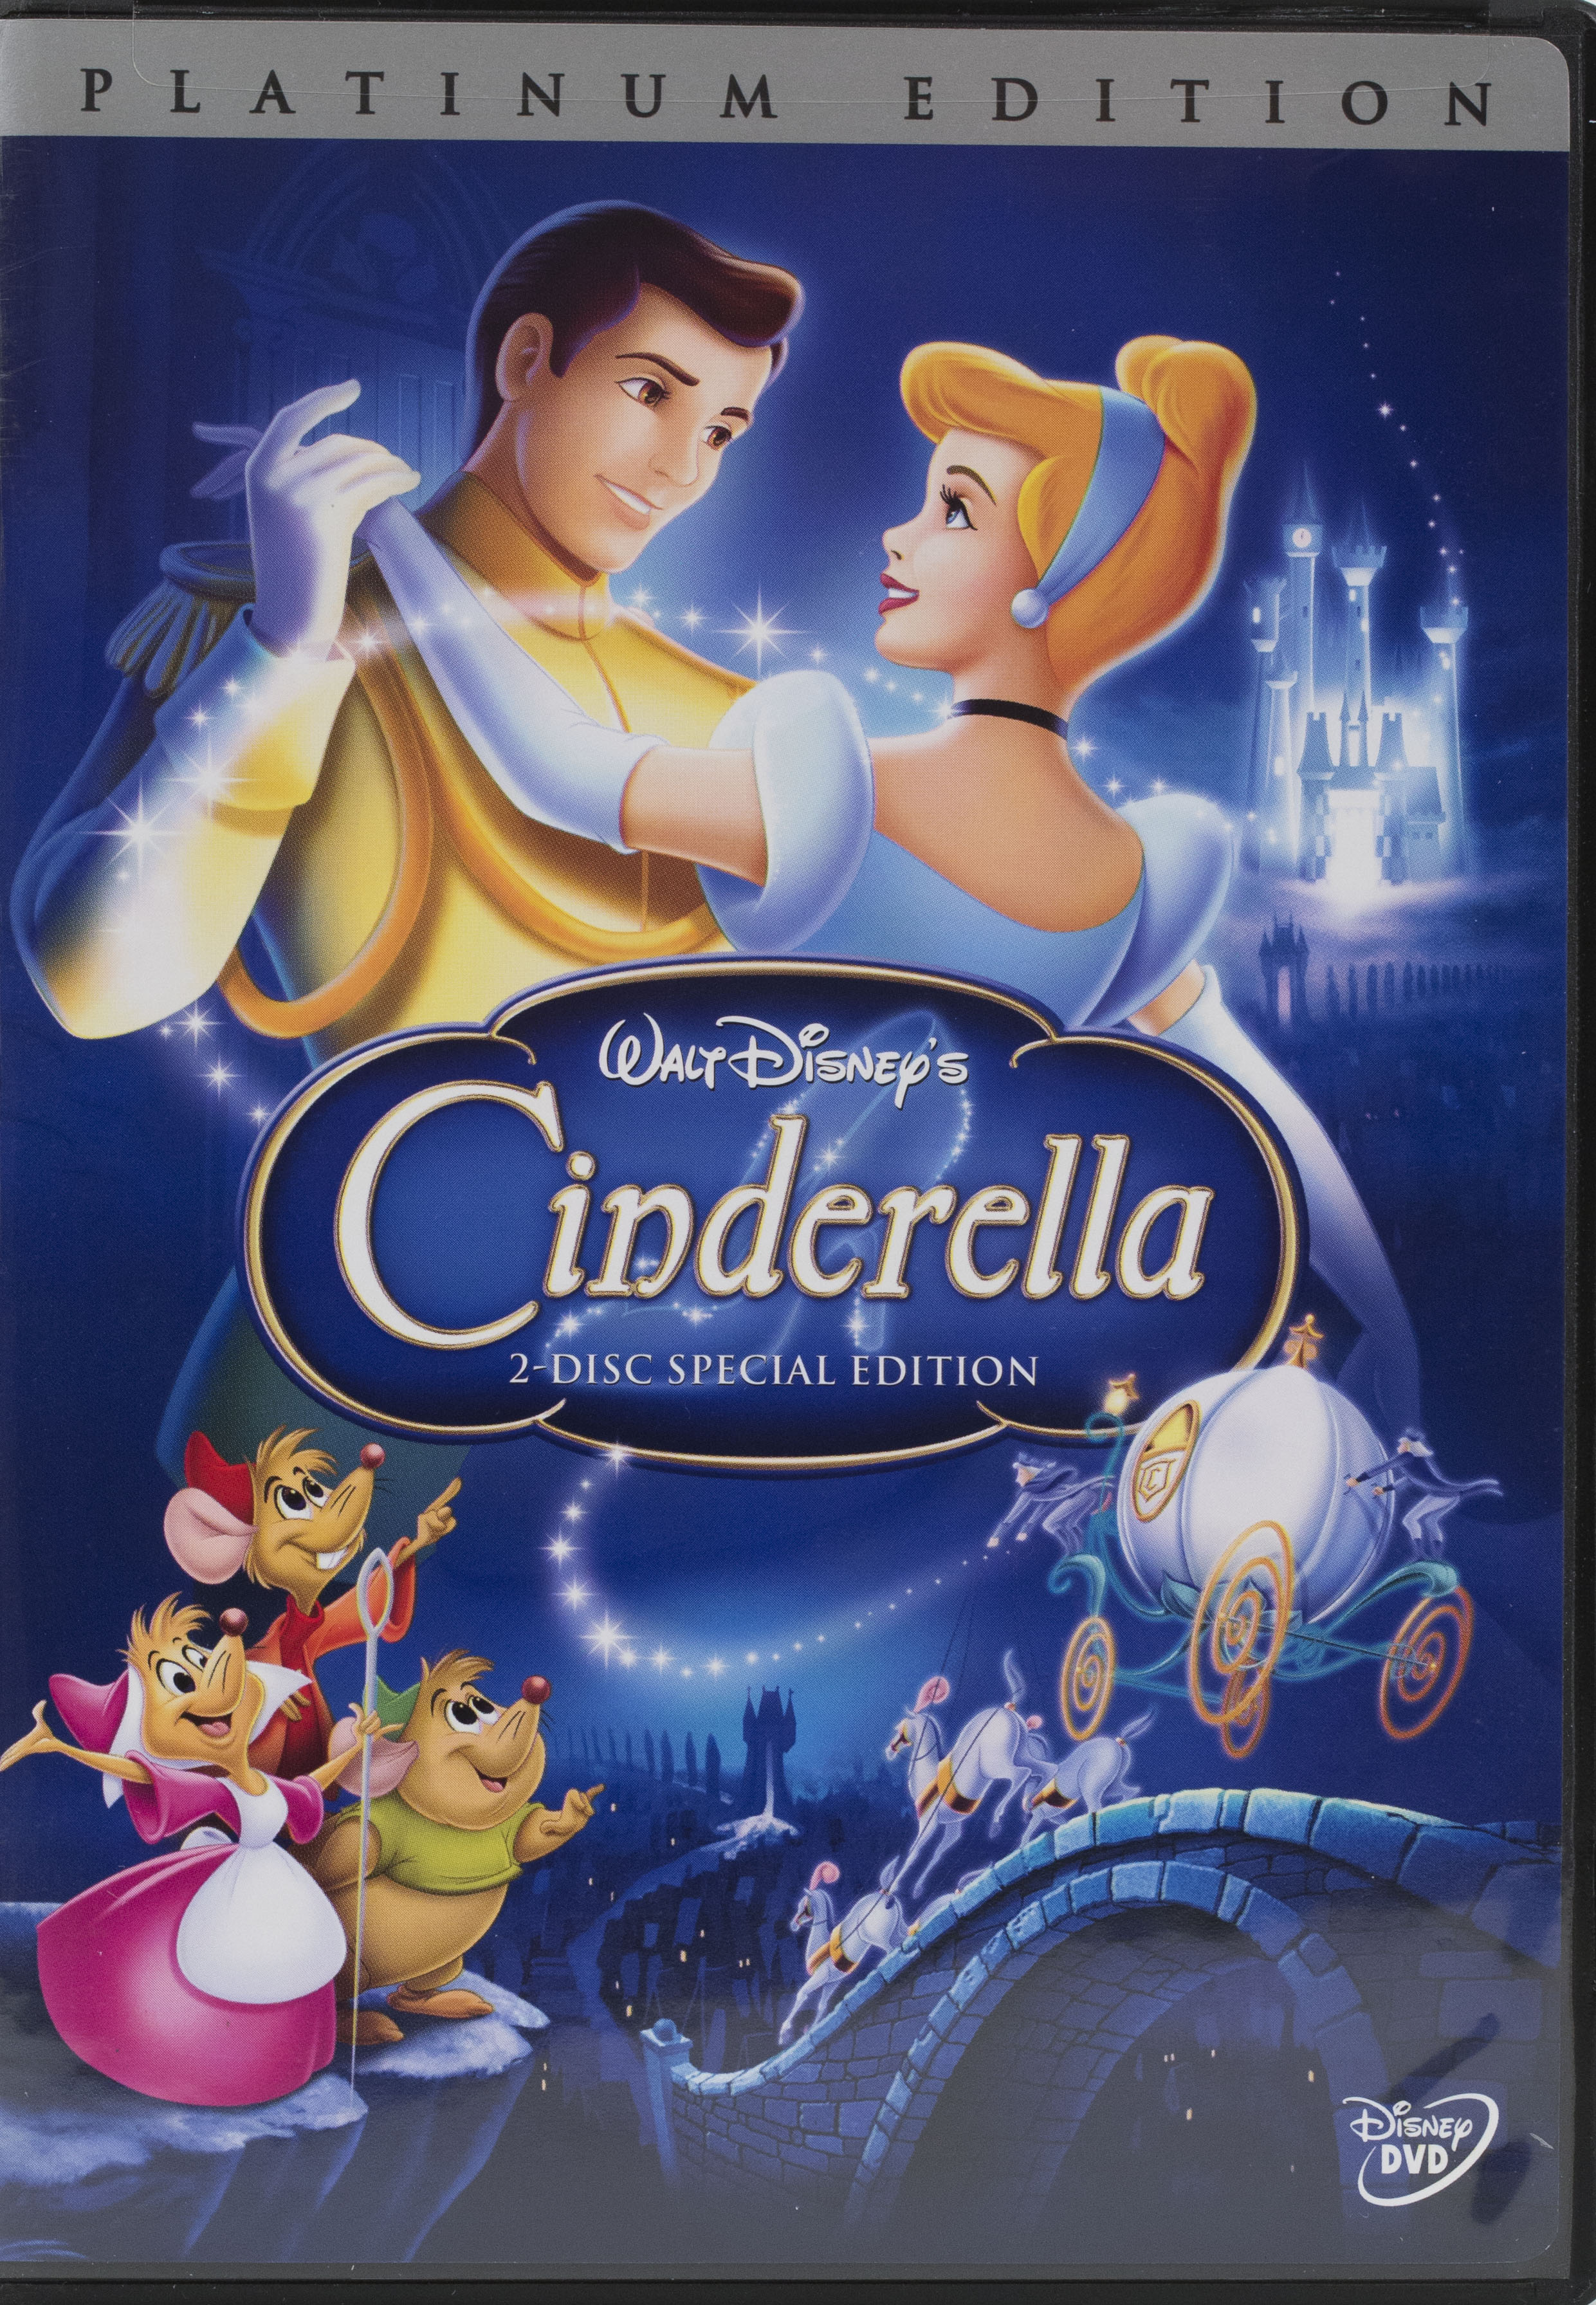 Real DVD front cover